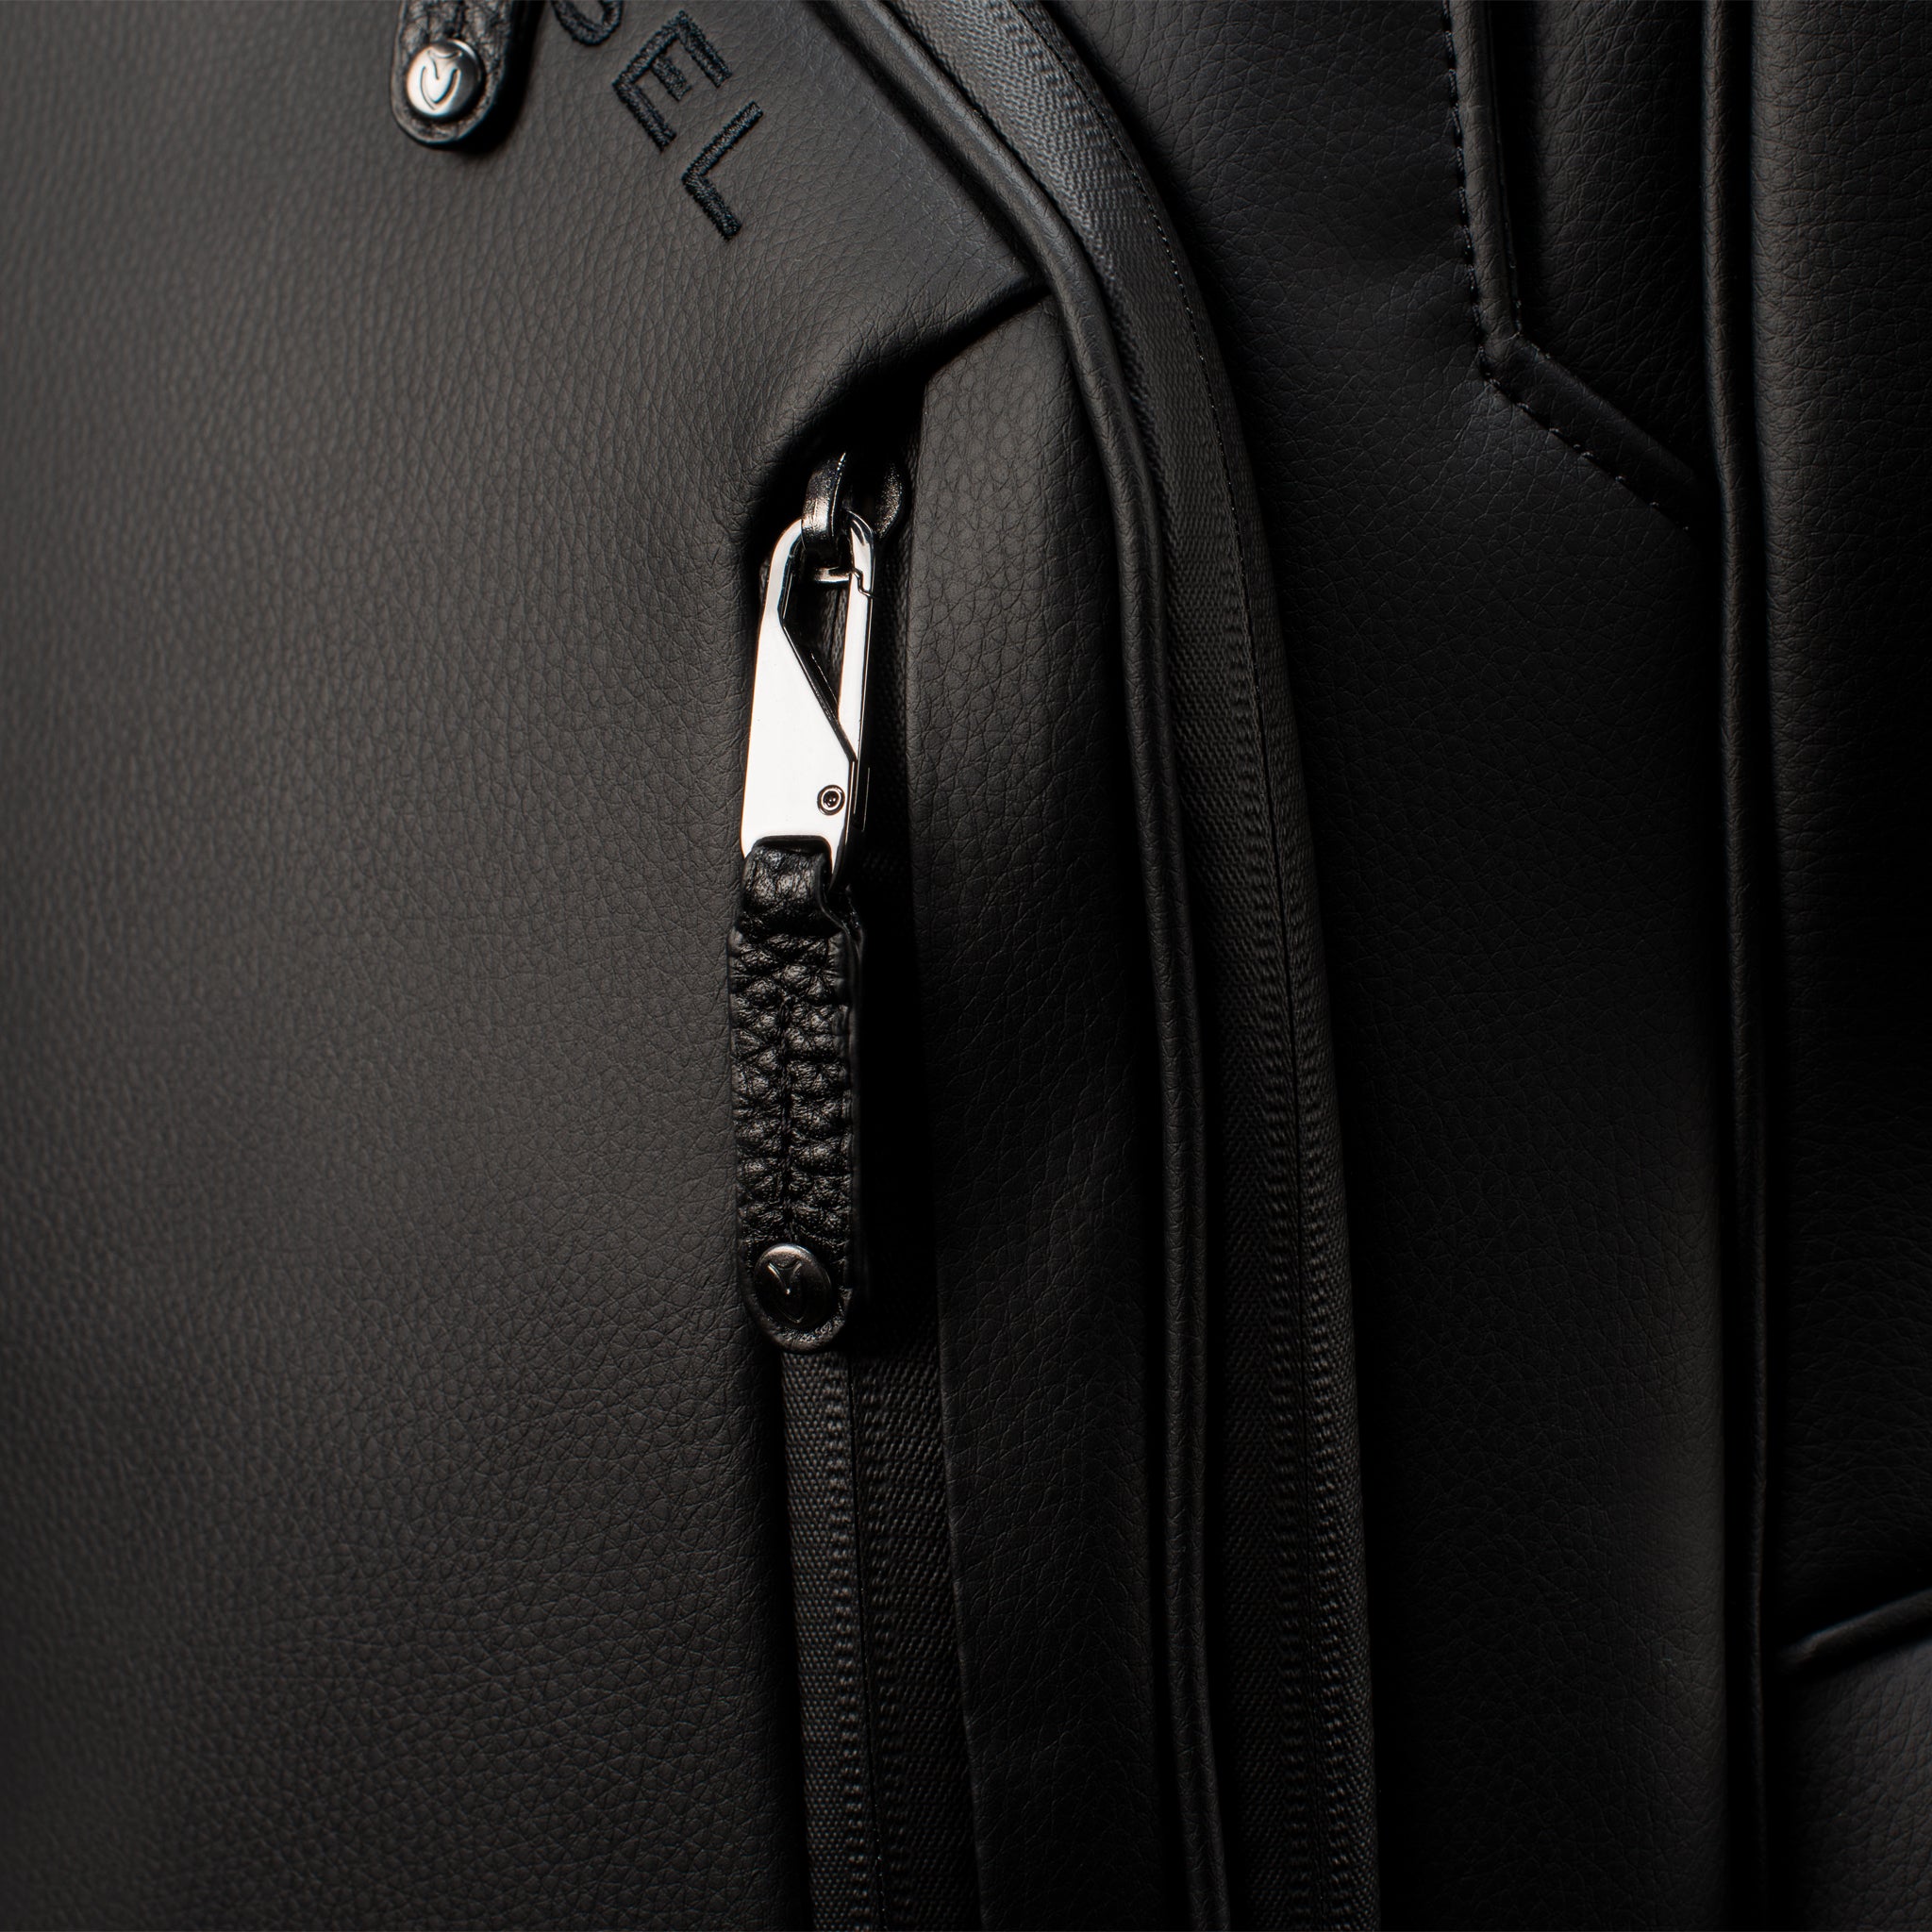 Close up of personal pocket zipper on black leather golf cart bag